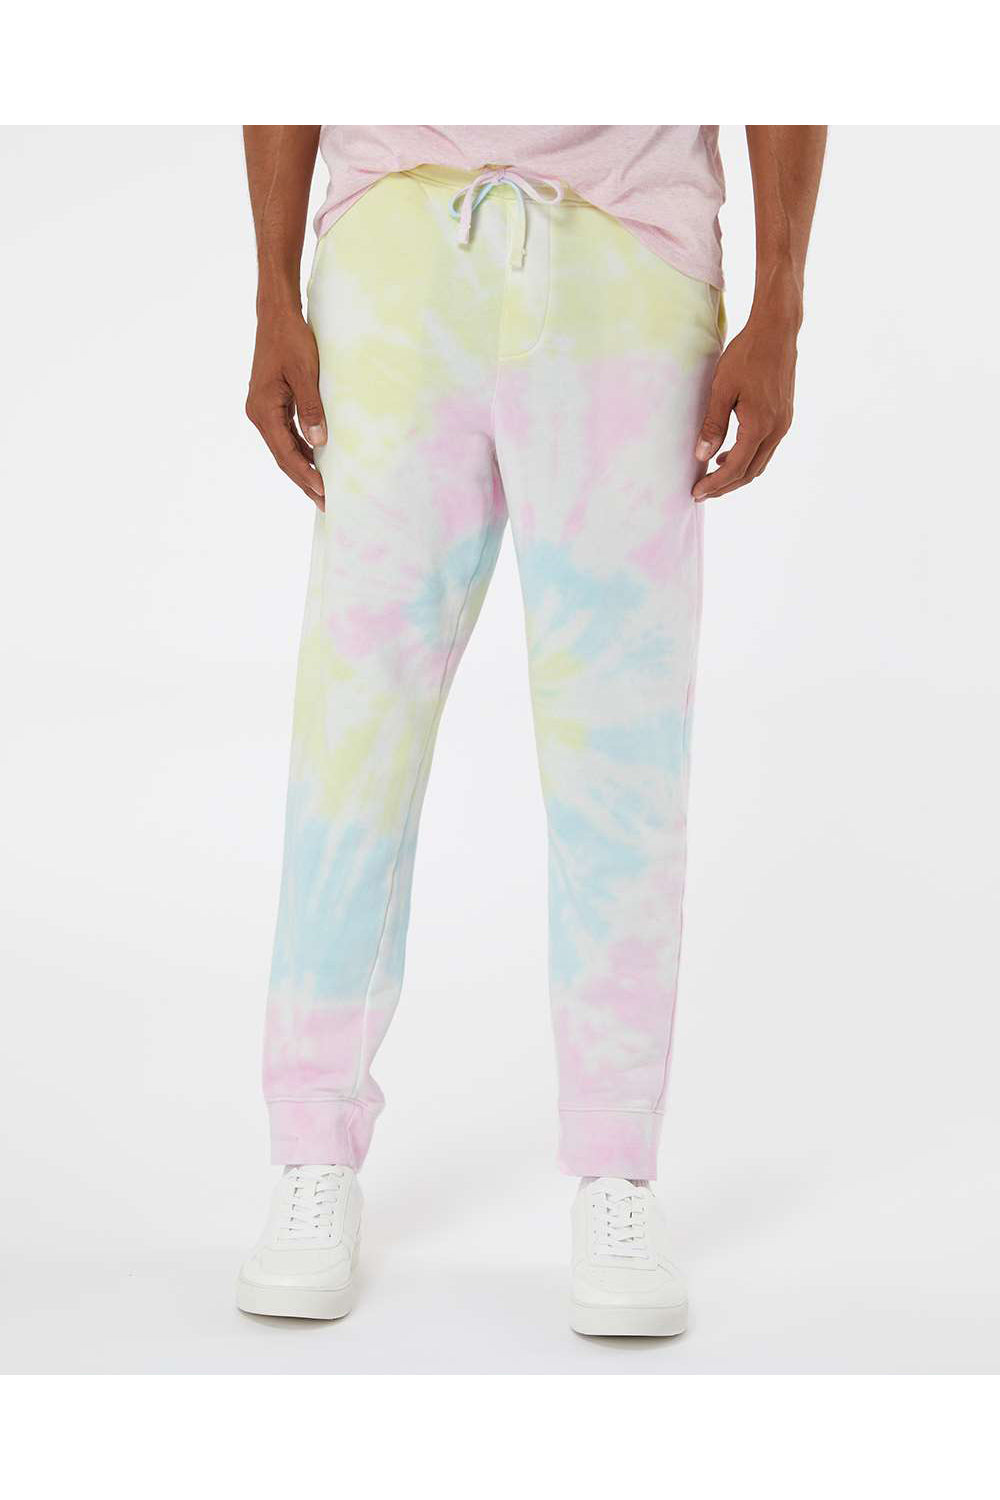 Independent Trading Co. PRM50PTTD Mens Tie-Dye Fleece Sweatpants w/ Pockets Sunset Swirl Model Front